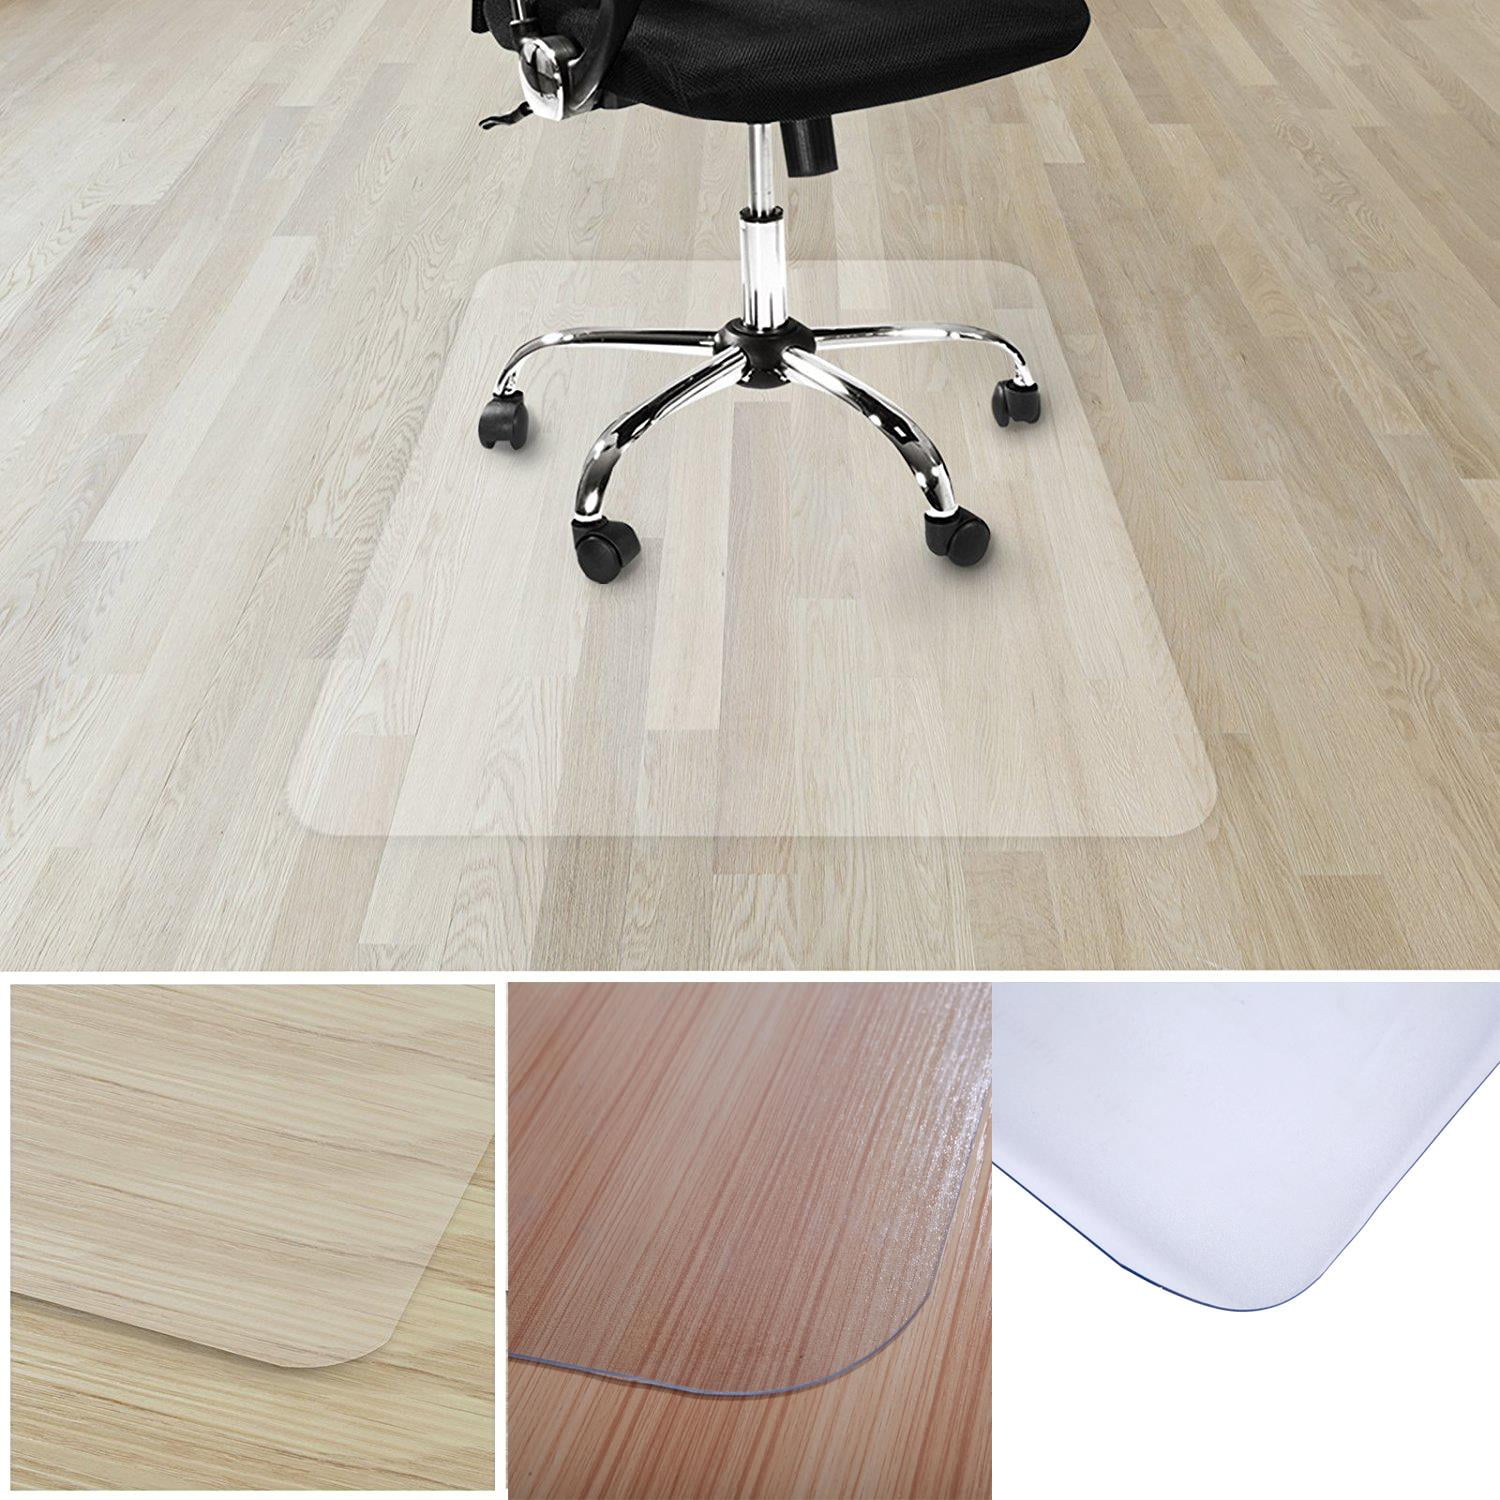 36x48"Hard Wood Floor Home Office PVC Floor Mat Square for Office Rolling Chair 